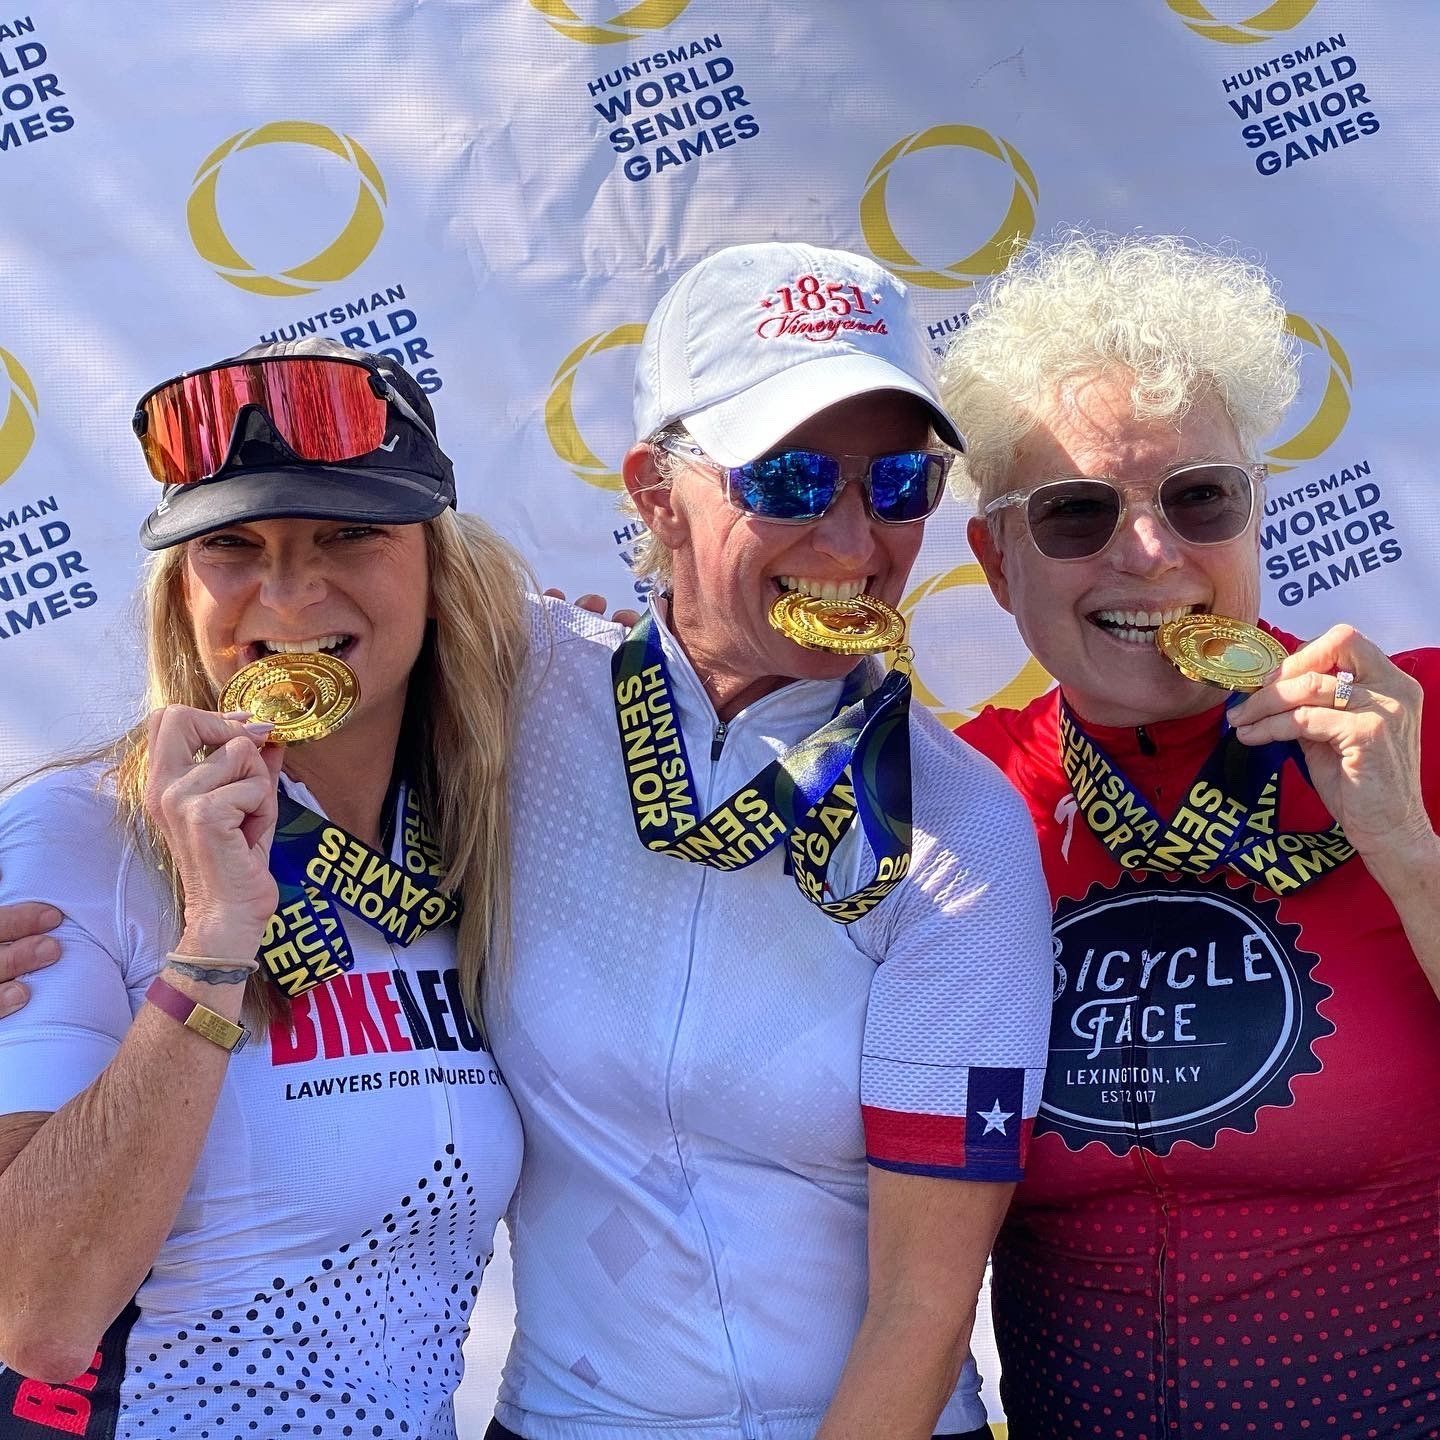 Gold Medal winners at Huntsman World Senior Games in women's cycling